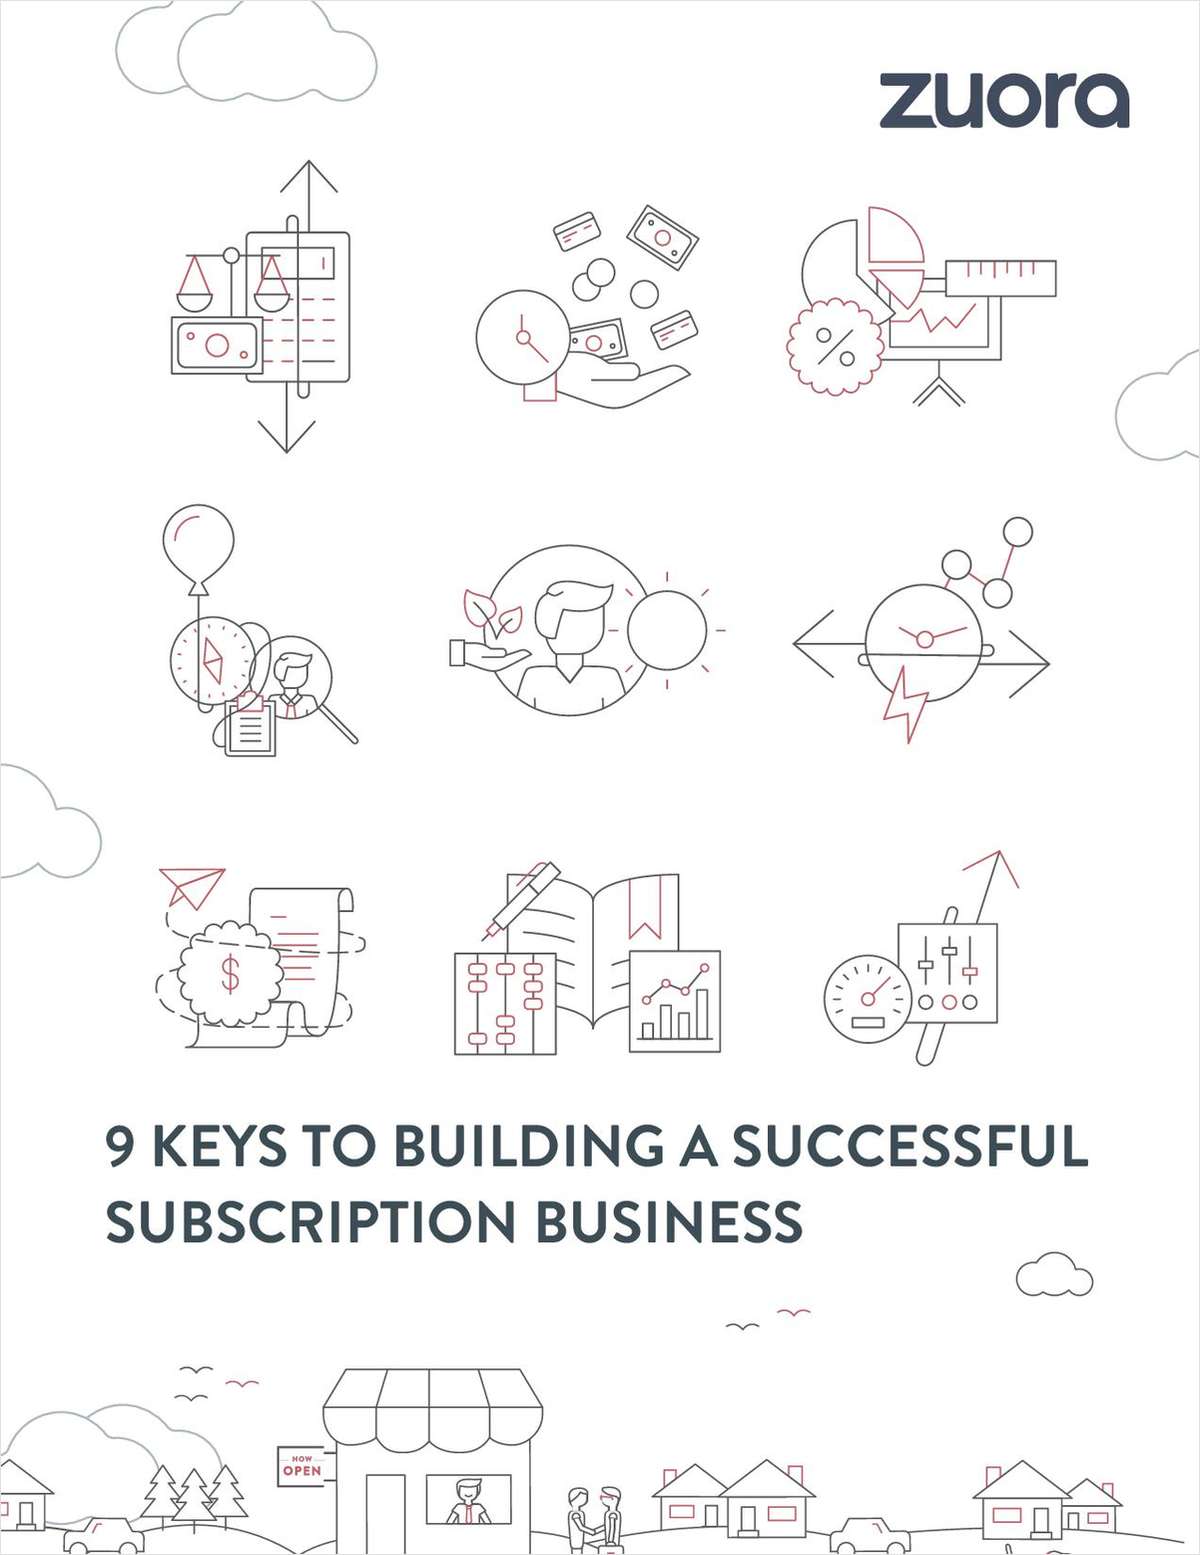 9 Keys to Building a Successful Subscription Business